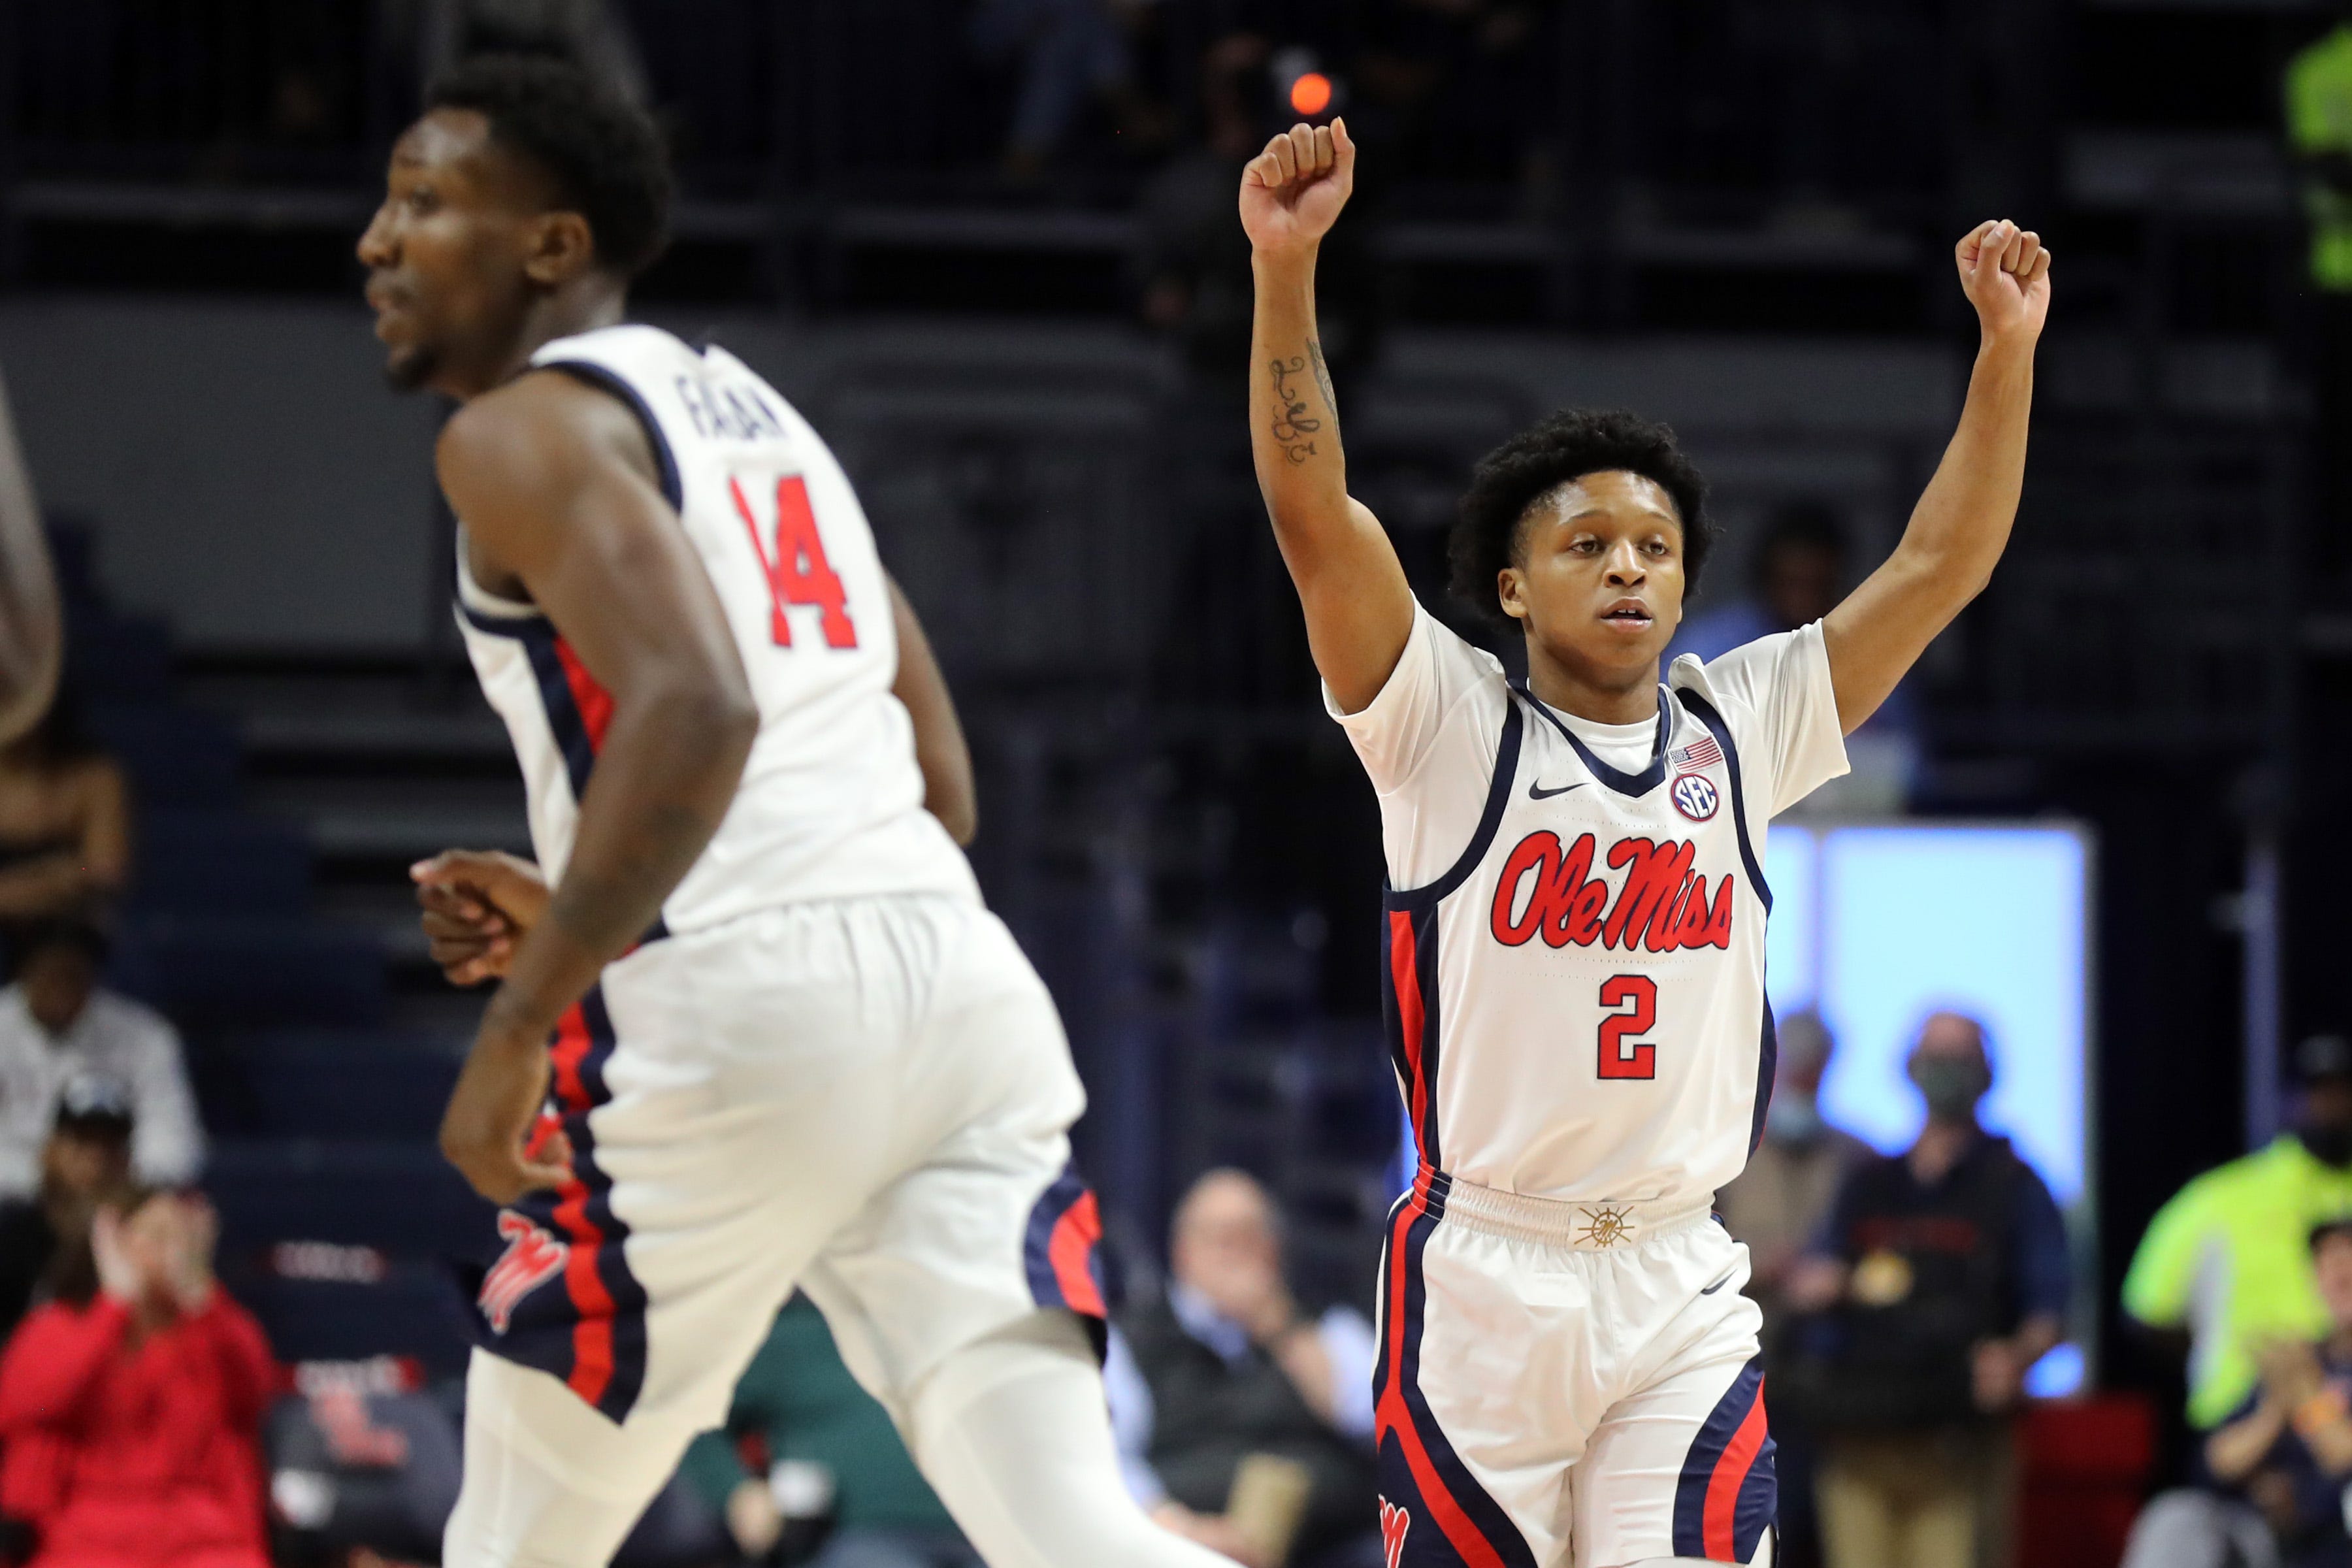 How to watch Ole Miss men's basketball vs. Texas A&M on TV, live stream plus game time